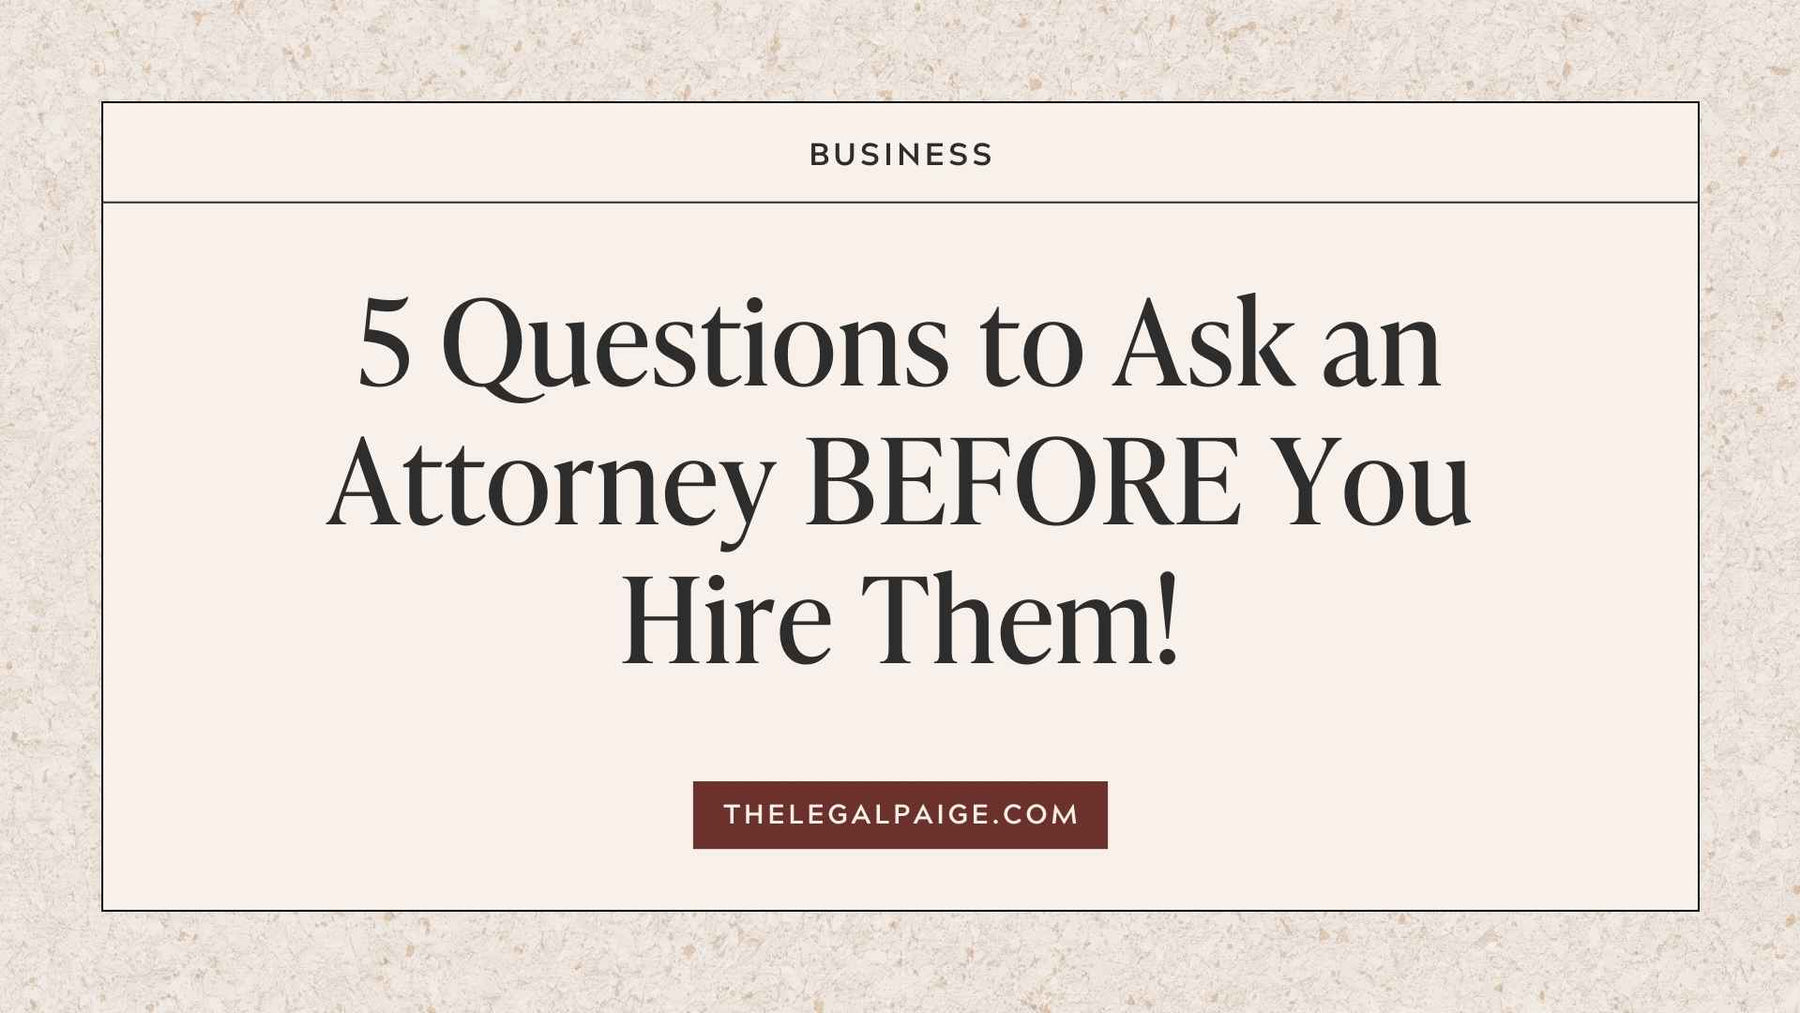 5 Questions to Ask an Attorney BEFORE You Hire Them!